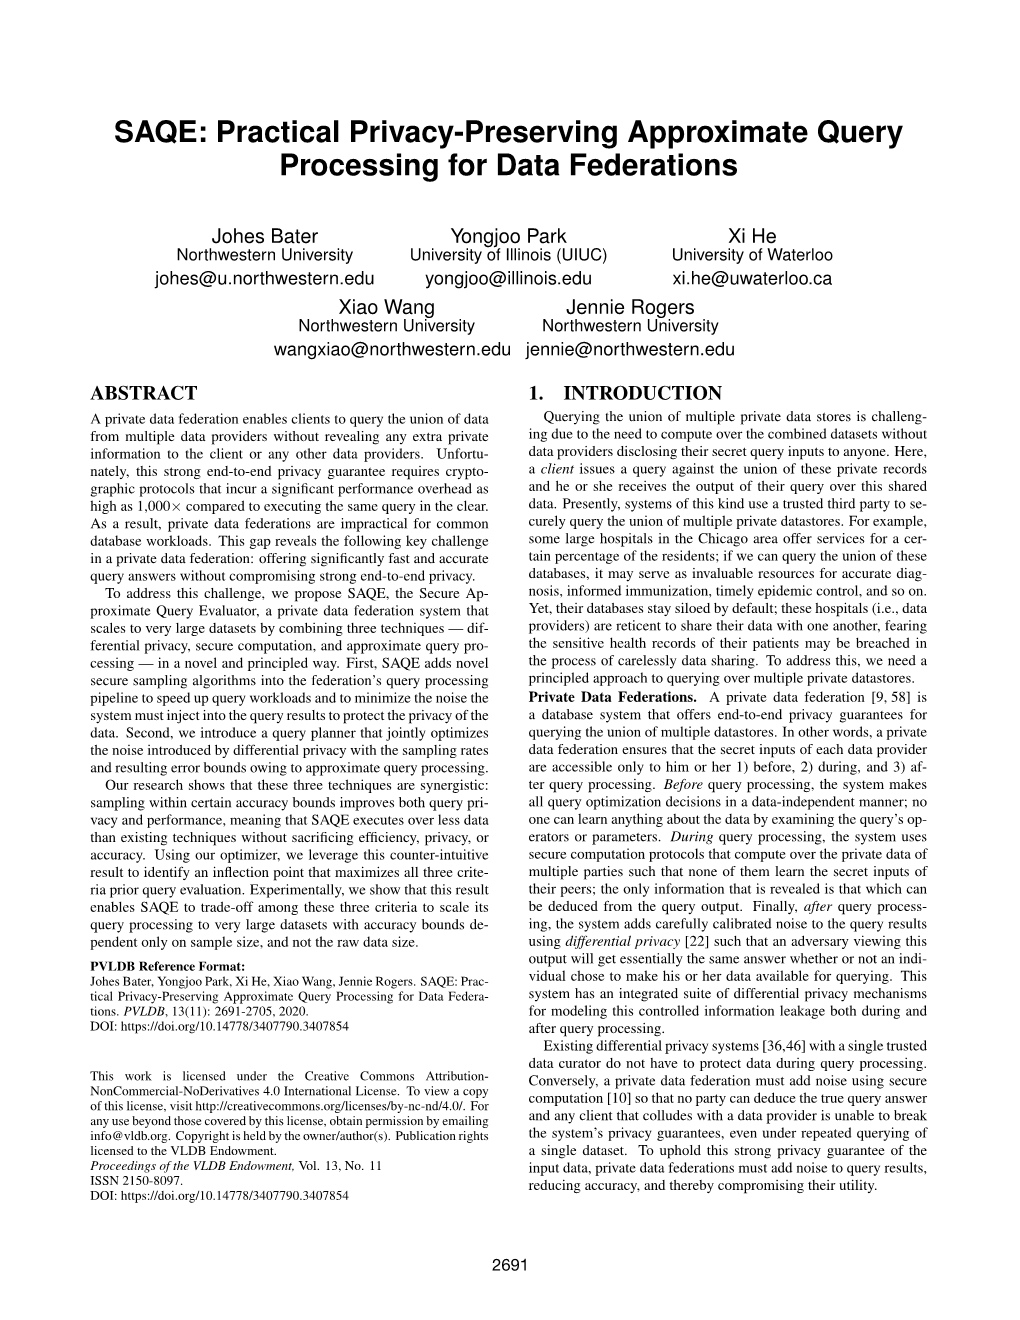 SAQE: Practical Privacy-Preserving Approximate Query Processing for Data Federations